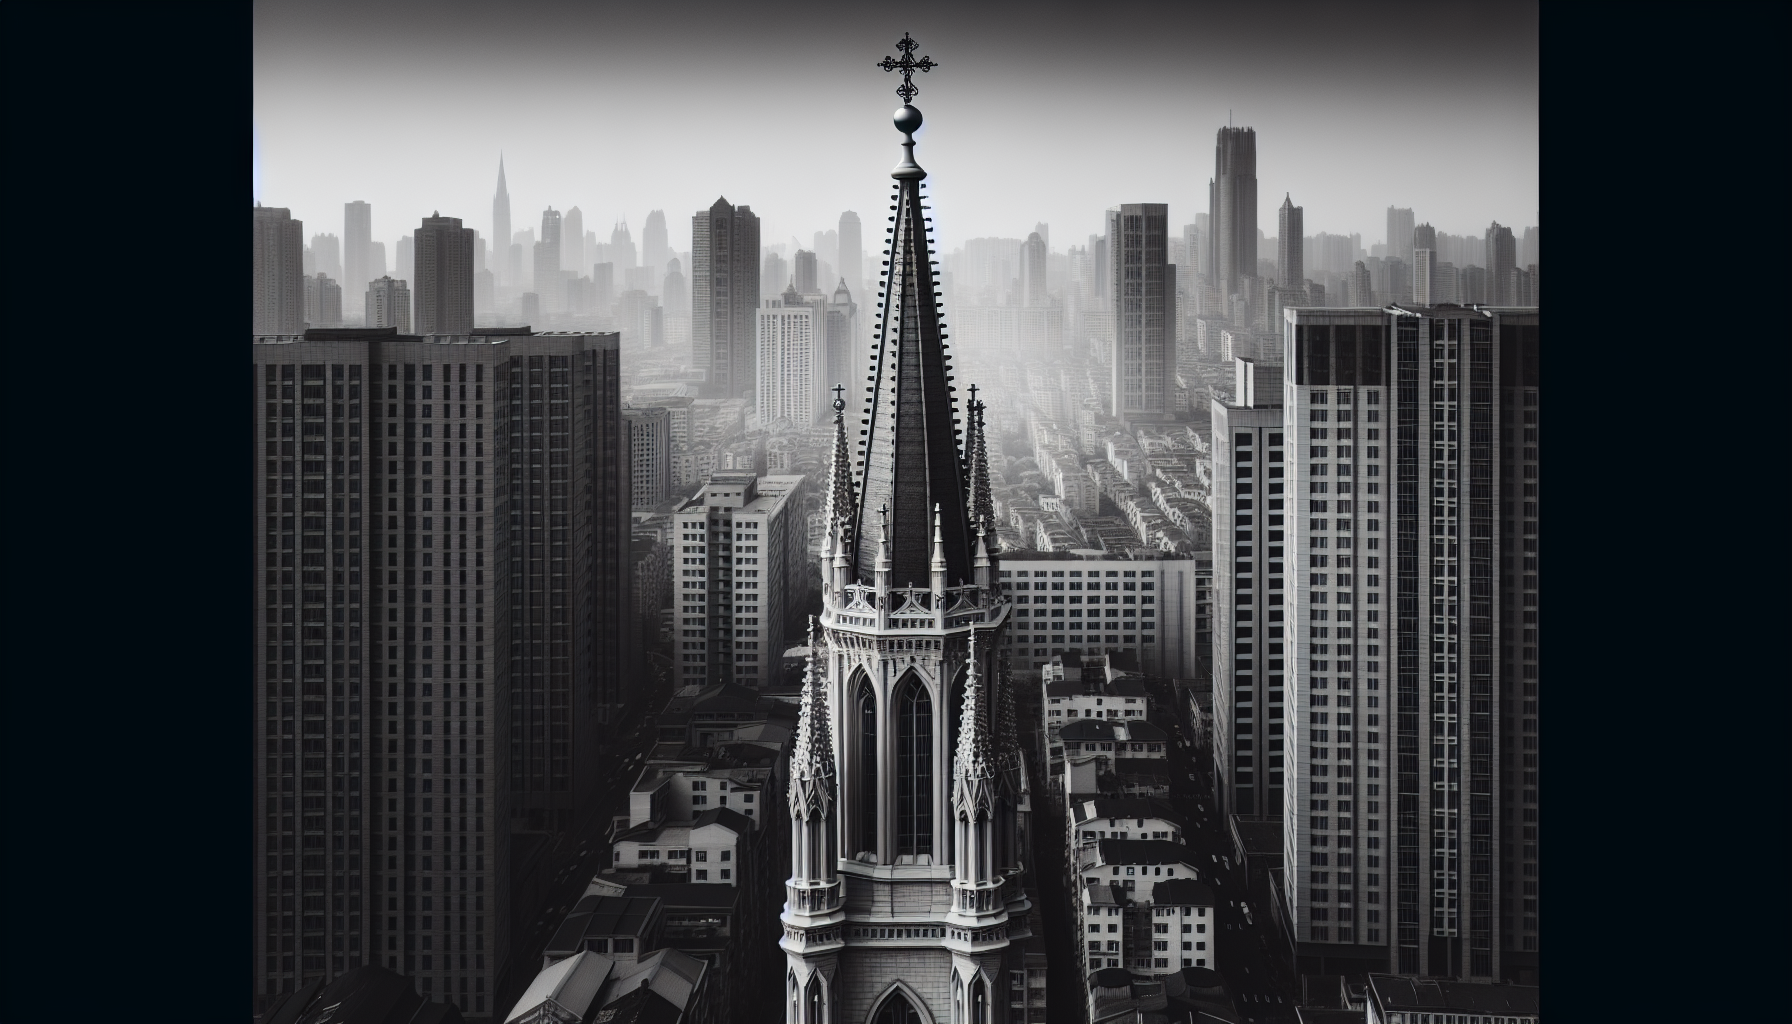 Why Do Churches Have Steeples Spires?